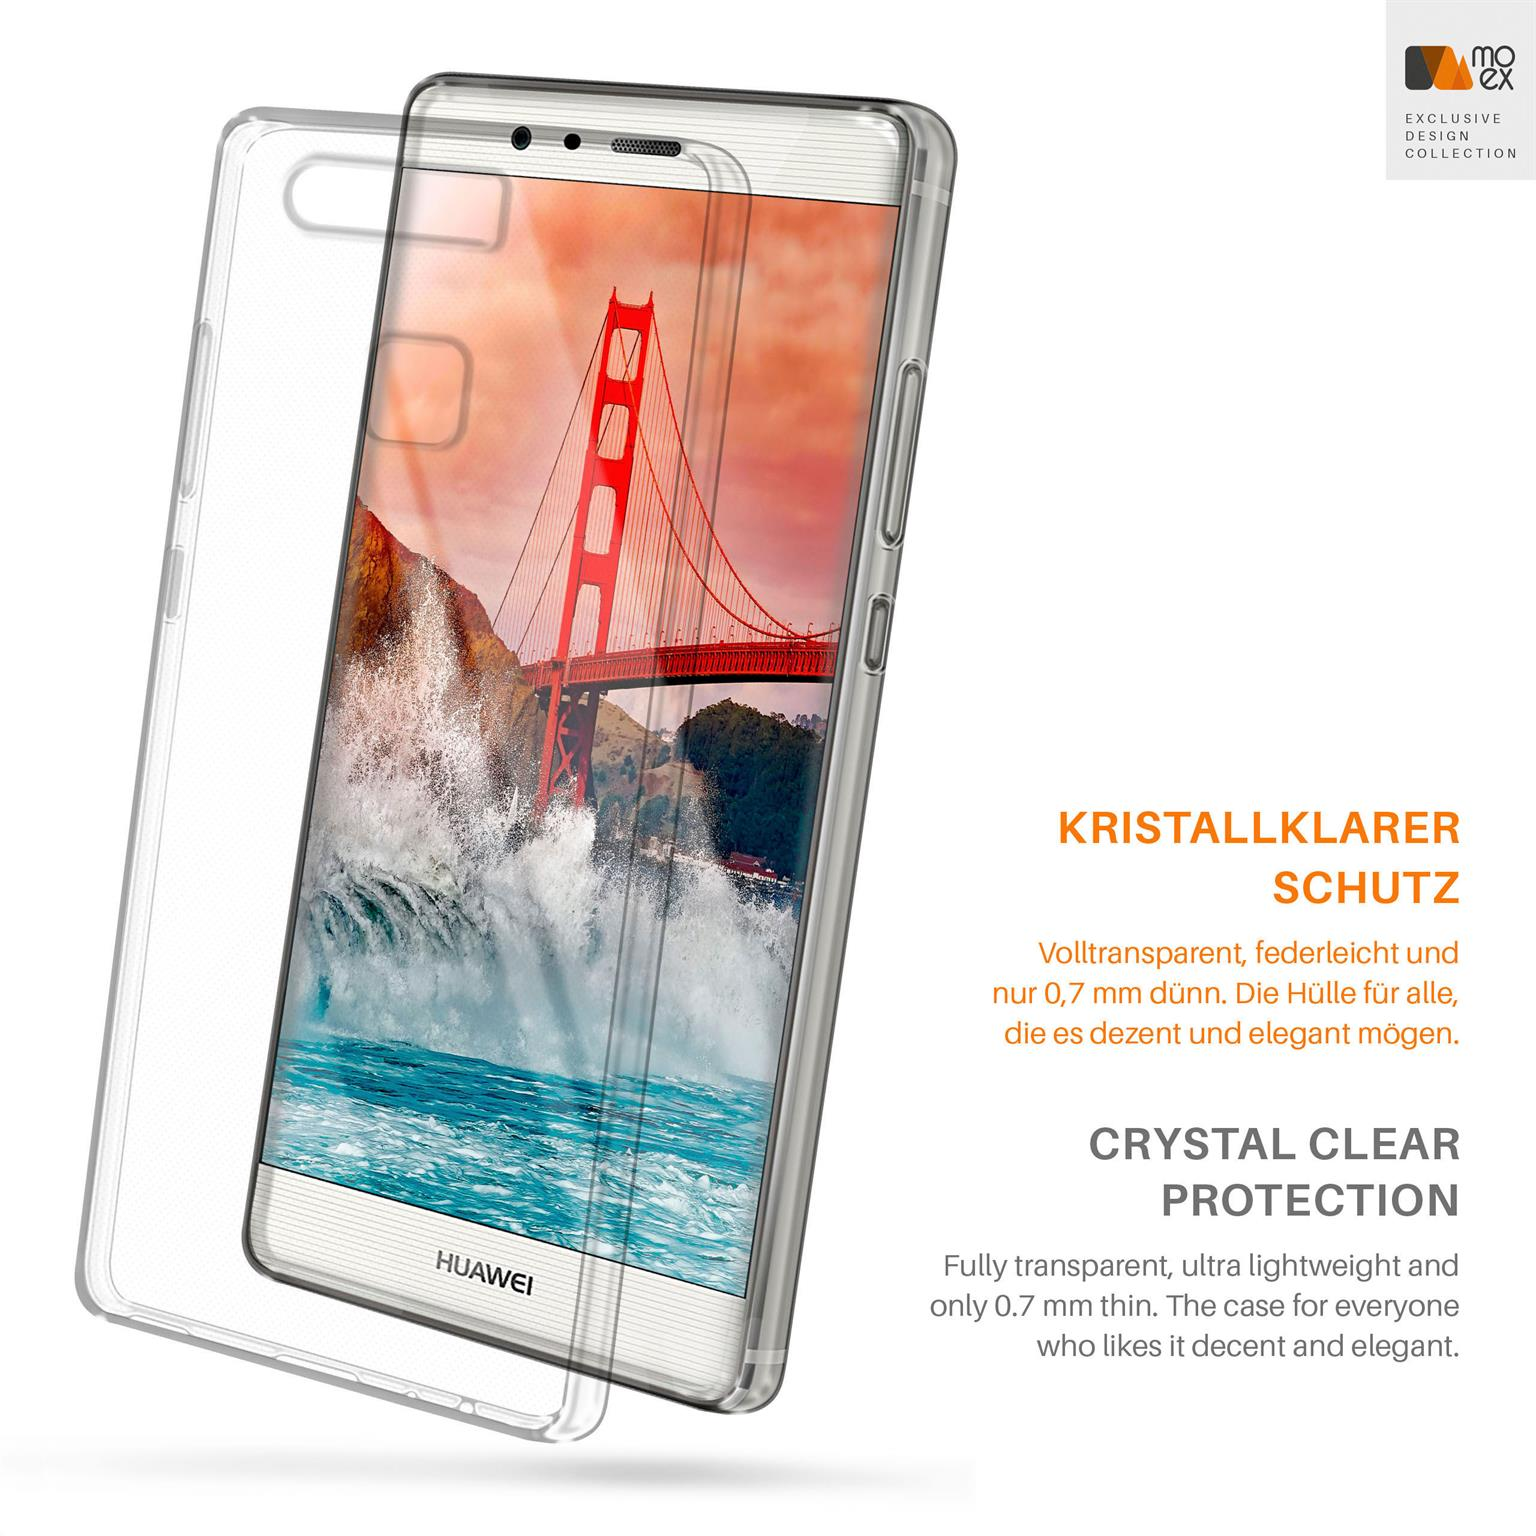 MOEX Aero Huawei, P9, Backcover, Case, Crystal-Clear